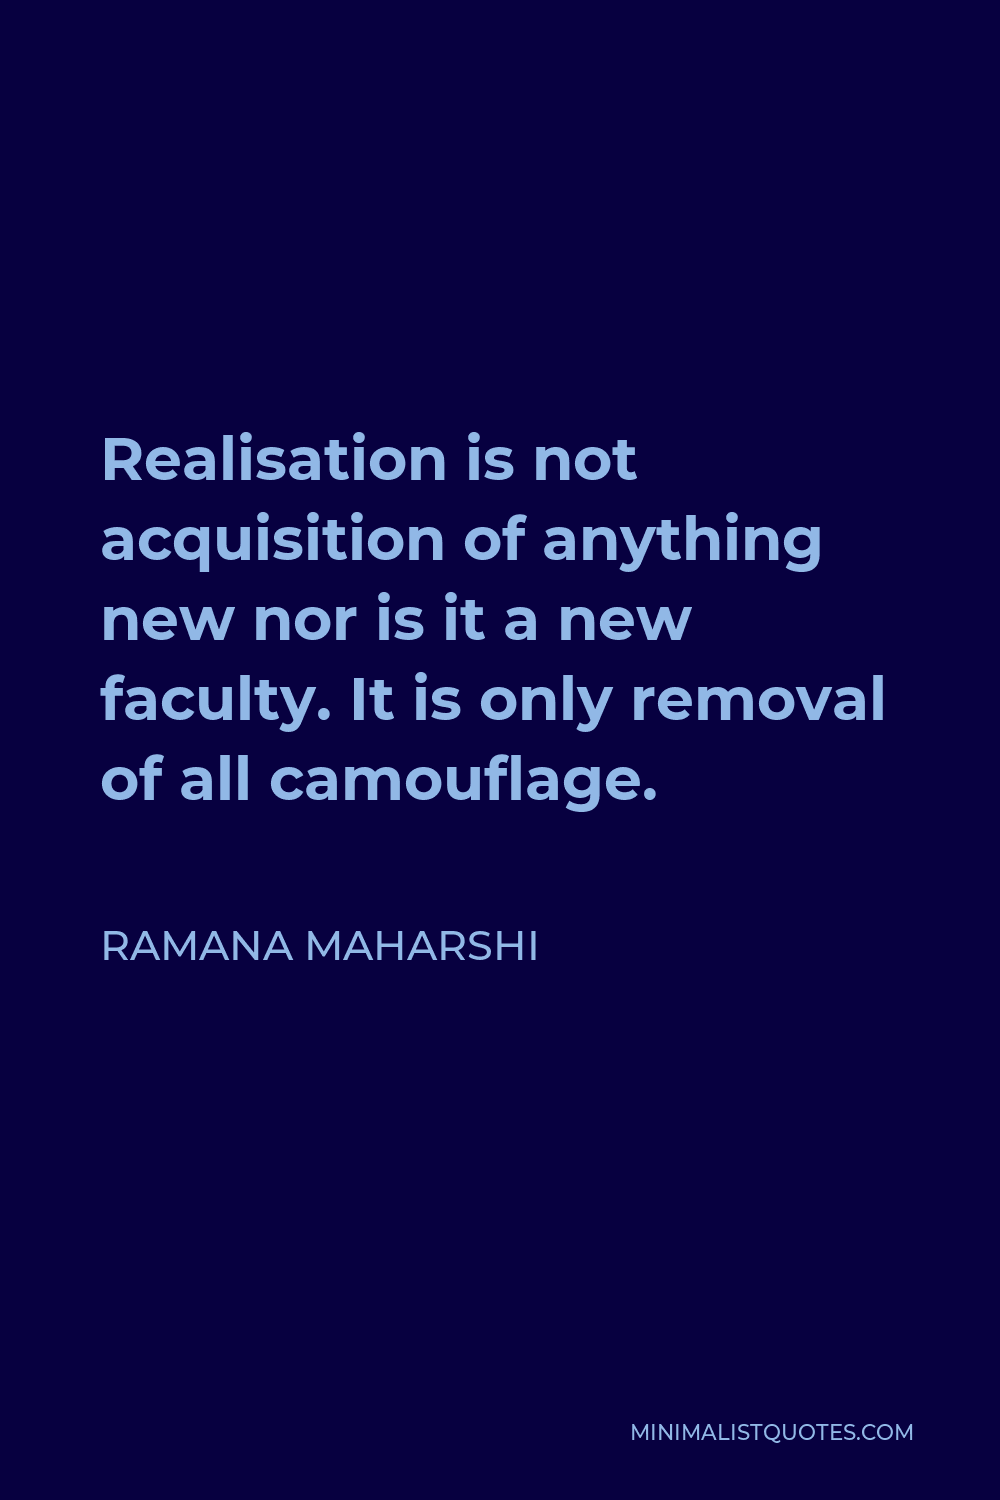 Ramana Maharshi Quote - Realisation is not acquisition of anything new nor is it a new faculty. It is only removal of all camouflage.